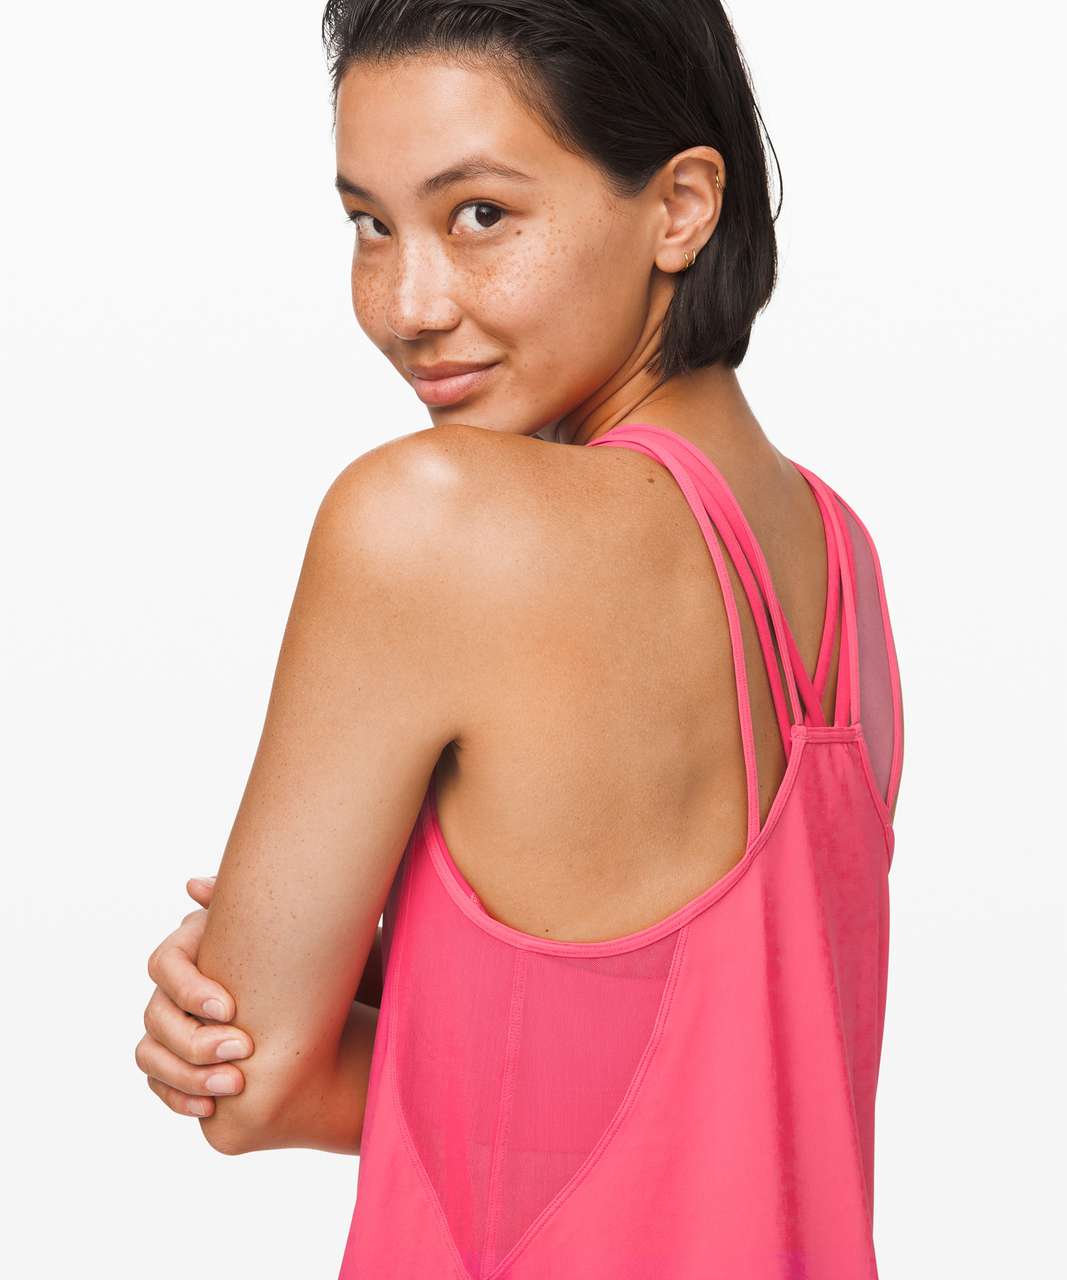 LULULEMON Run Off Route Tank Women’s Tank Top Color Iced Iris Size 6 NEW  w/Tags